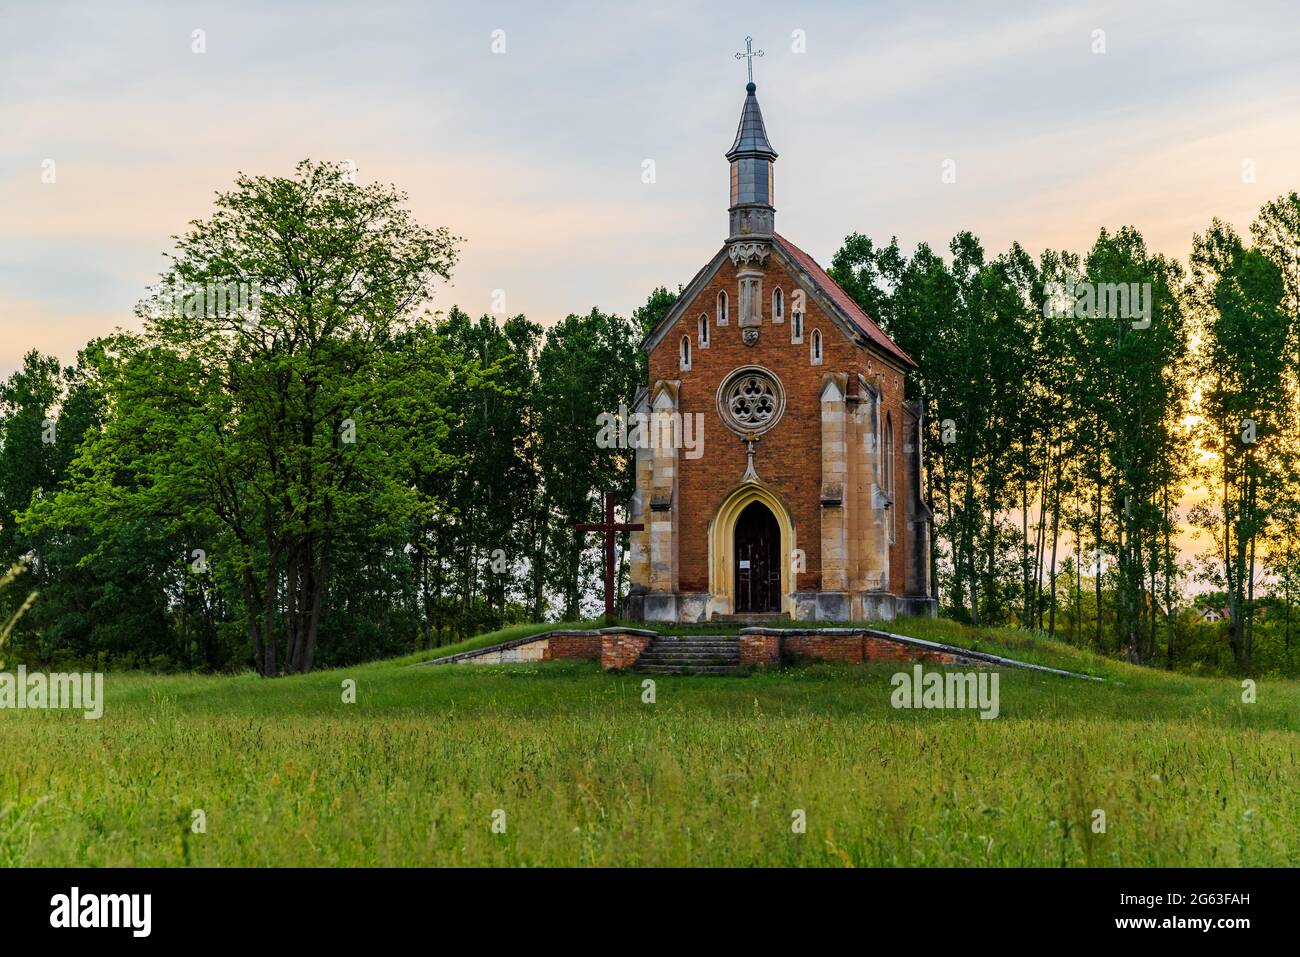 Zichy chapel in Lorev village Hungary. This is a memorial place for Jeno Zichy who was executed after the revolution of 1848 here. built in 1858 by ne Stock Photo